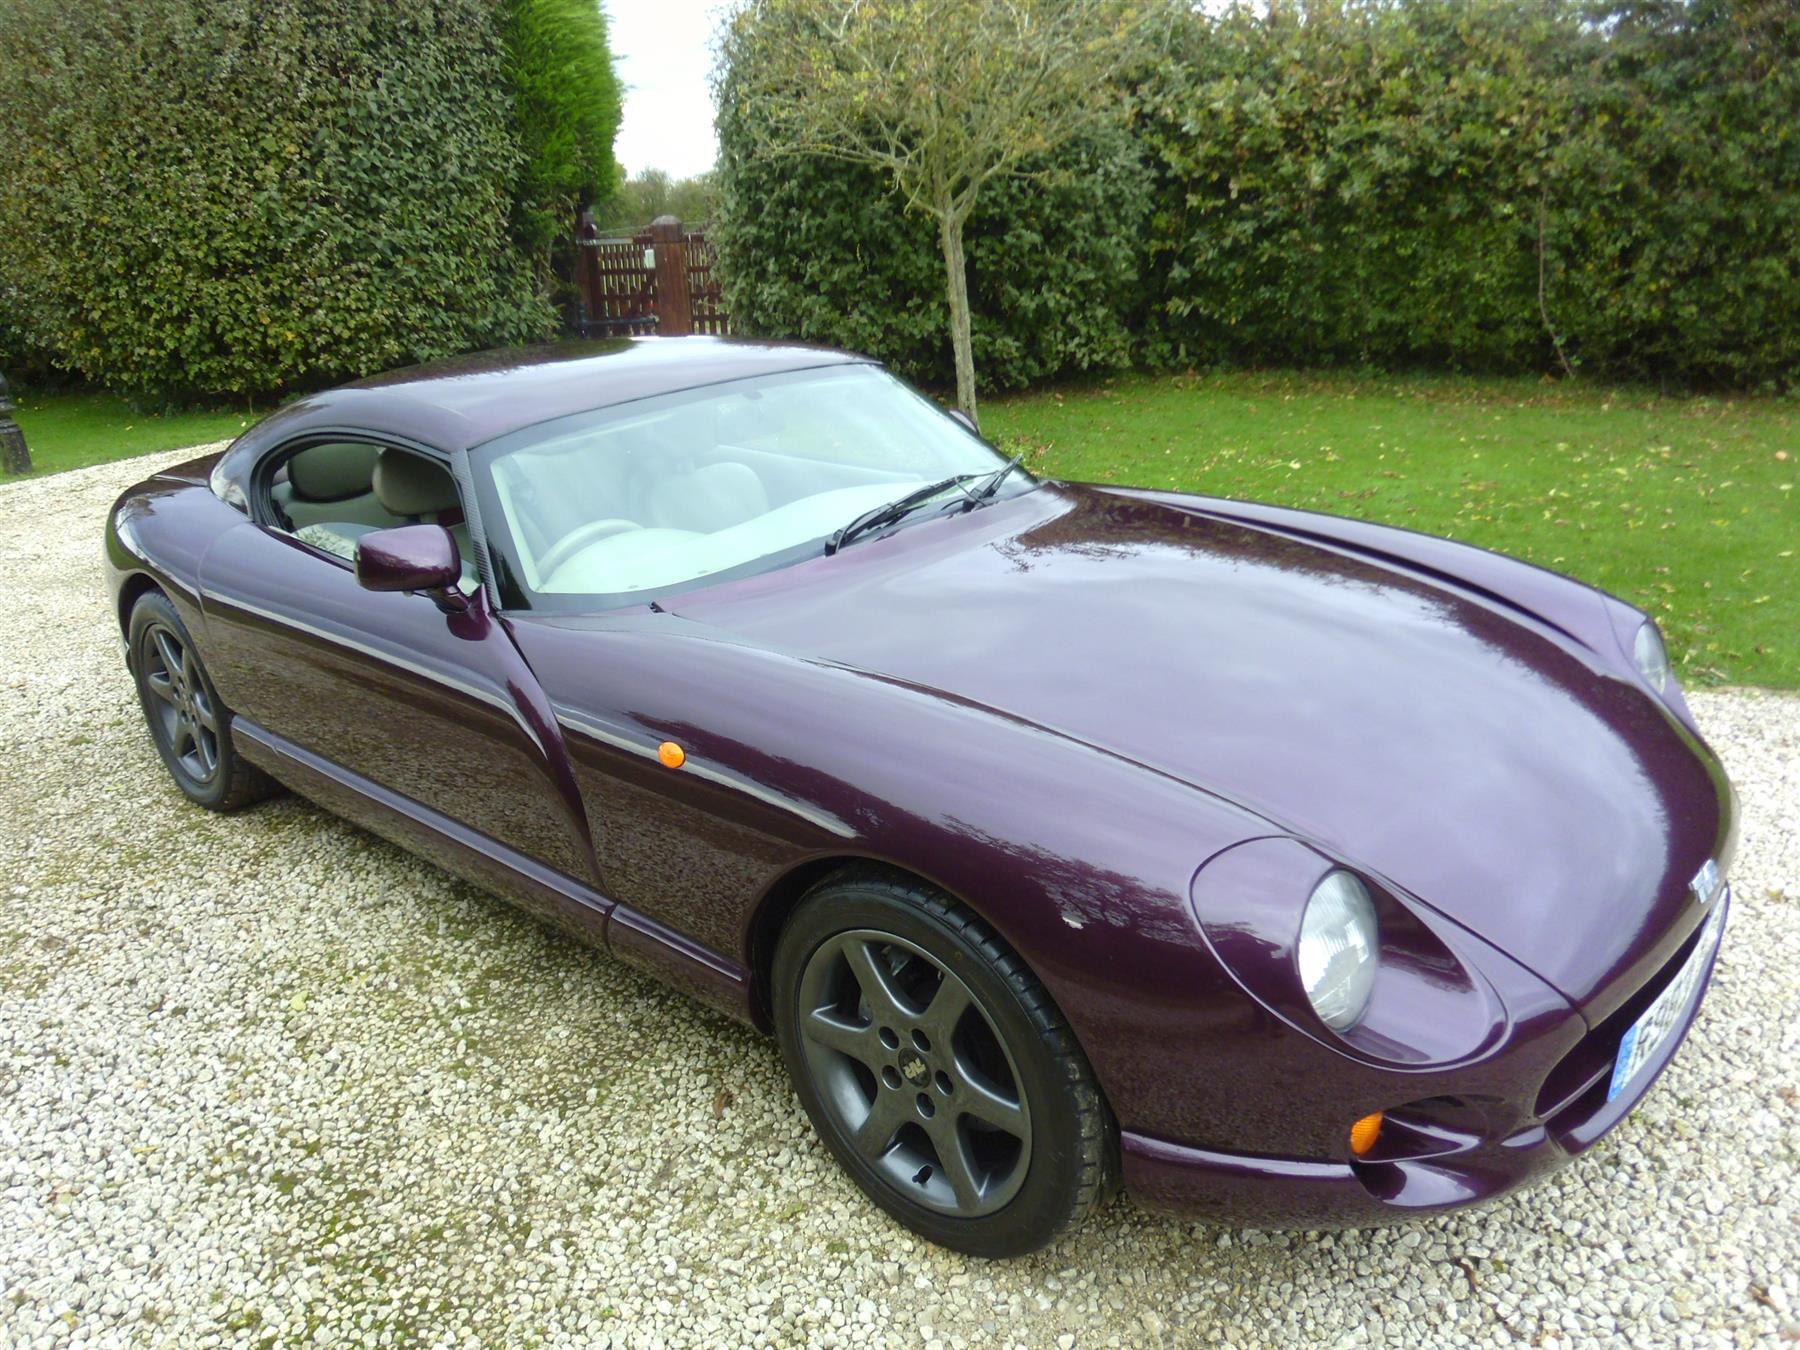 Used TVR Cerbera cars for sale with PistonHeads. 